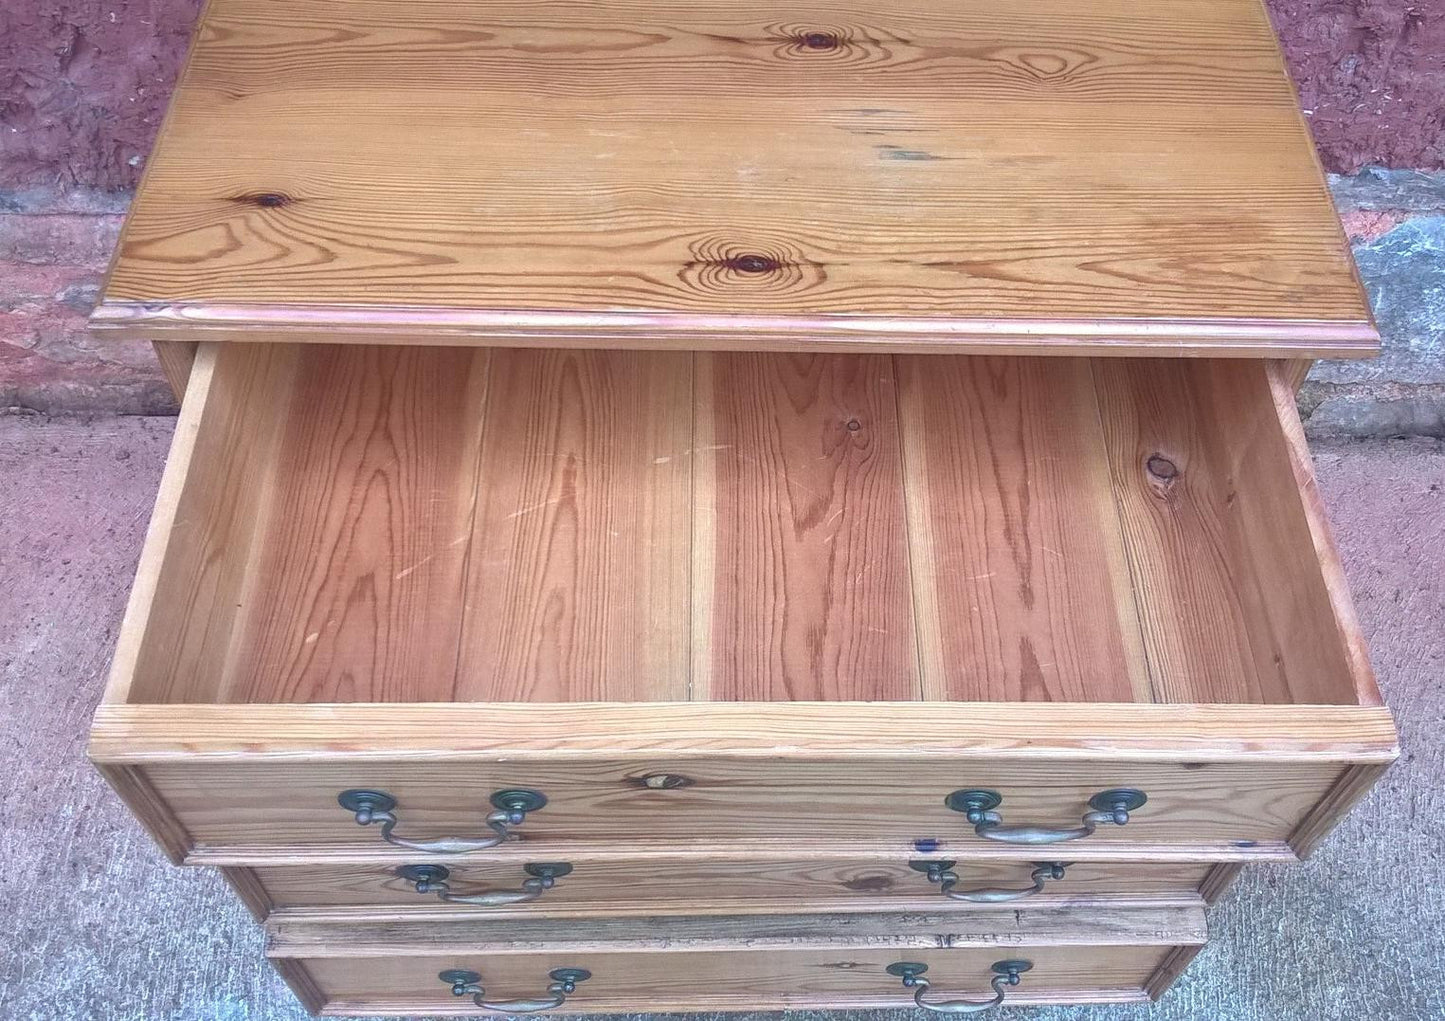 339.....Vintage Solid Pine Chest Of Drawers ( SOLD )